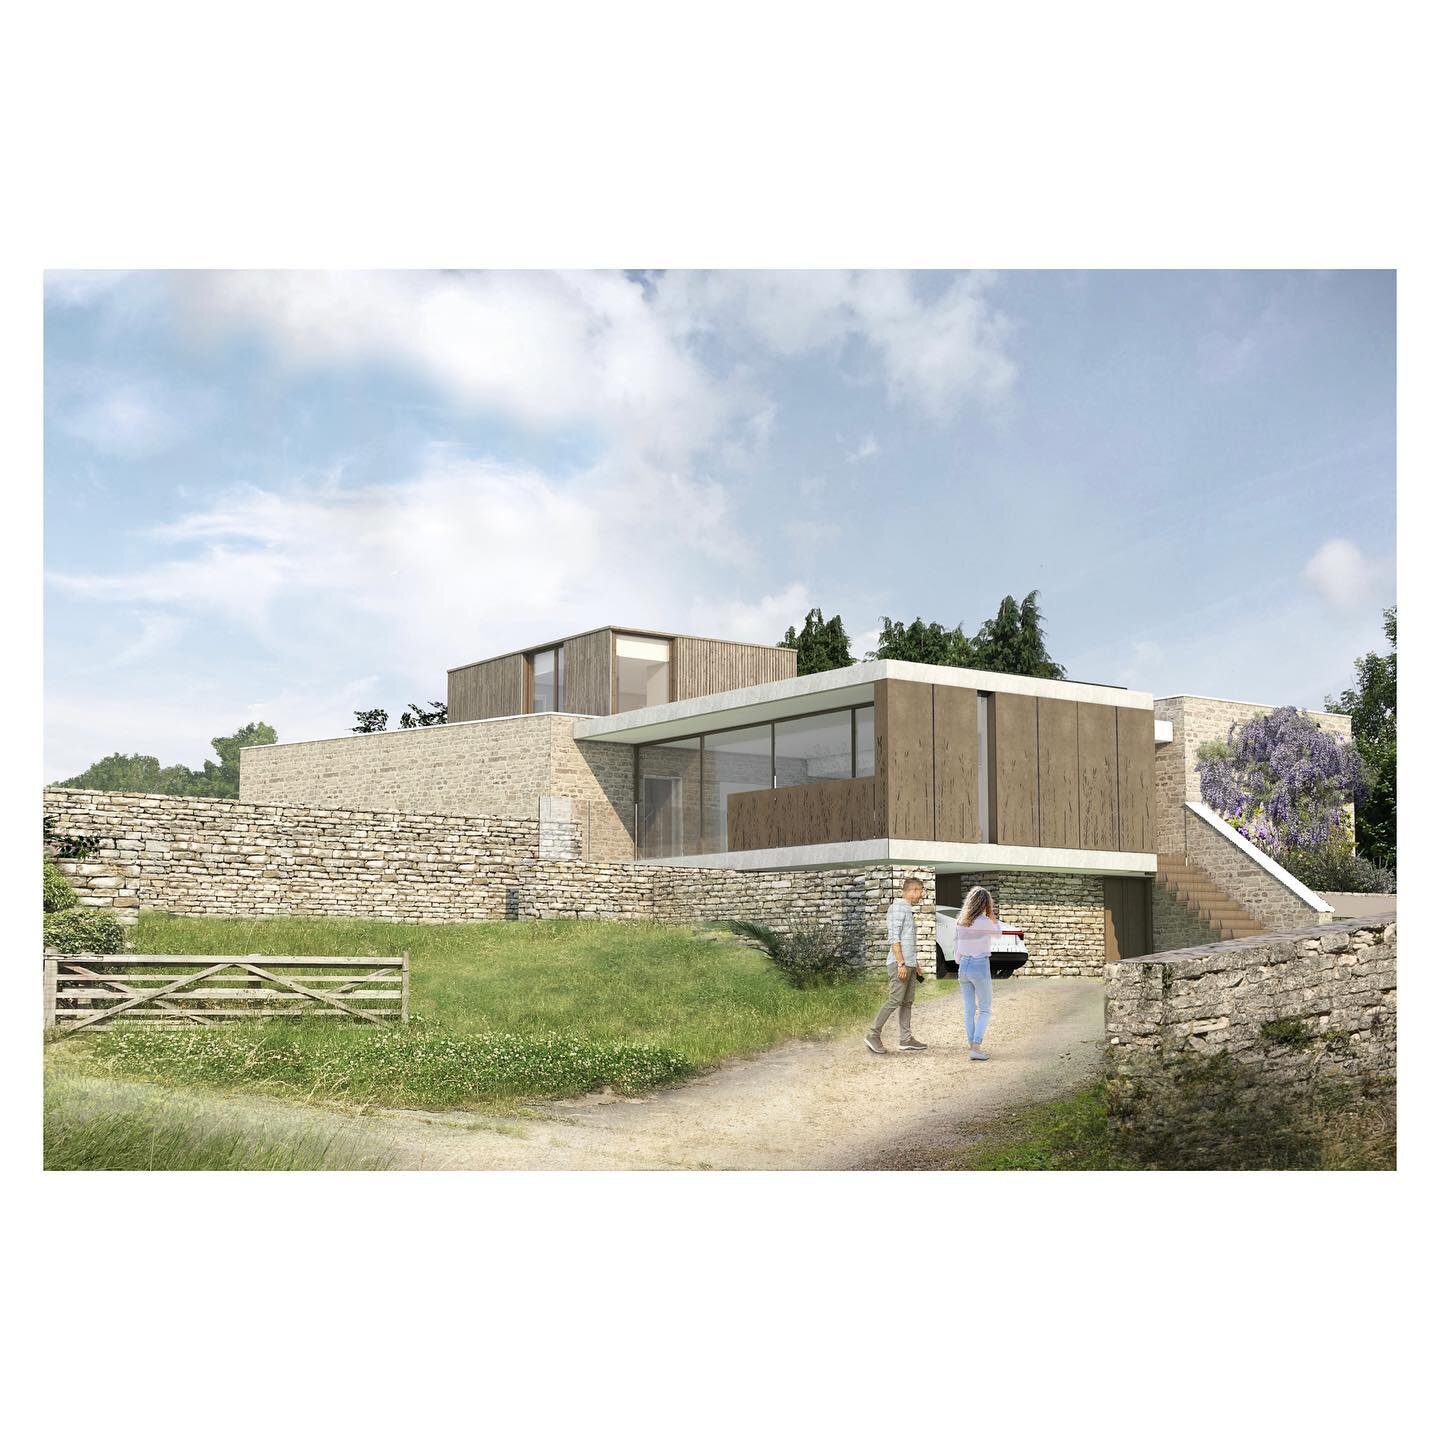 | New House

Our proposal to replace an existing 1970s bungalow with a new low energy home has been submitted for planning.

The design reuses rubble stone from the site to create a continuous wall that runs through the house to subdivide key interna